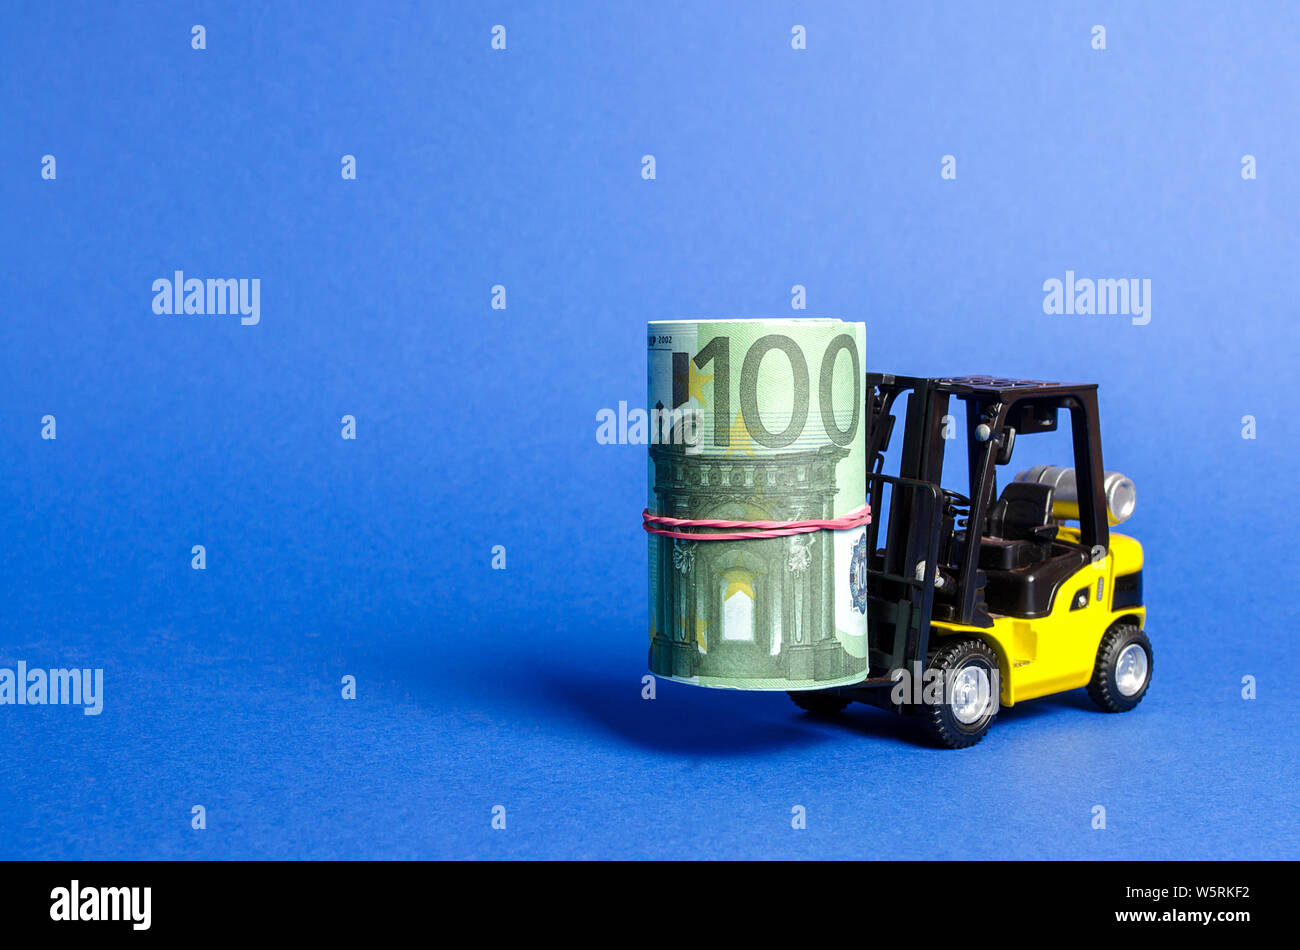 Forklift Truck Carries A Bundle Of Euro Attracting Direct Investment In Business And Production Improving Economic Performance Capitalism Export O Stock Photo Alamy